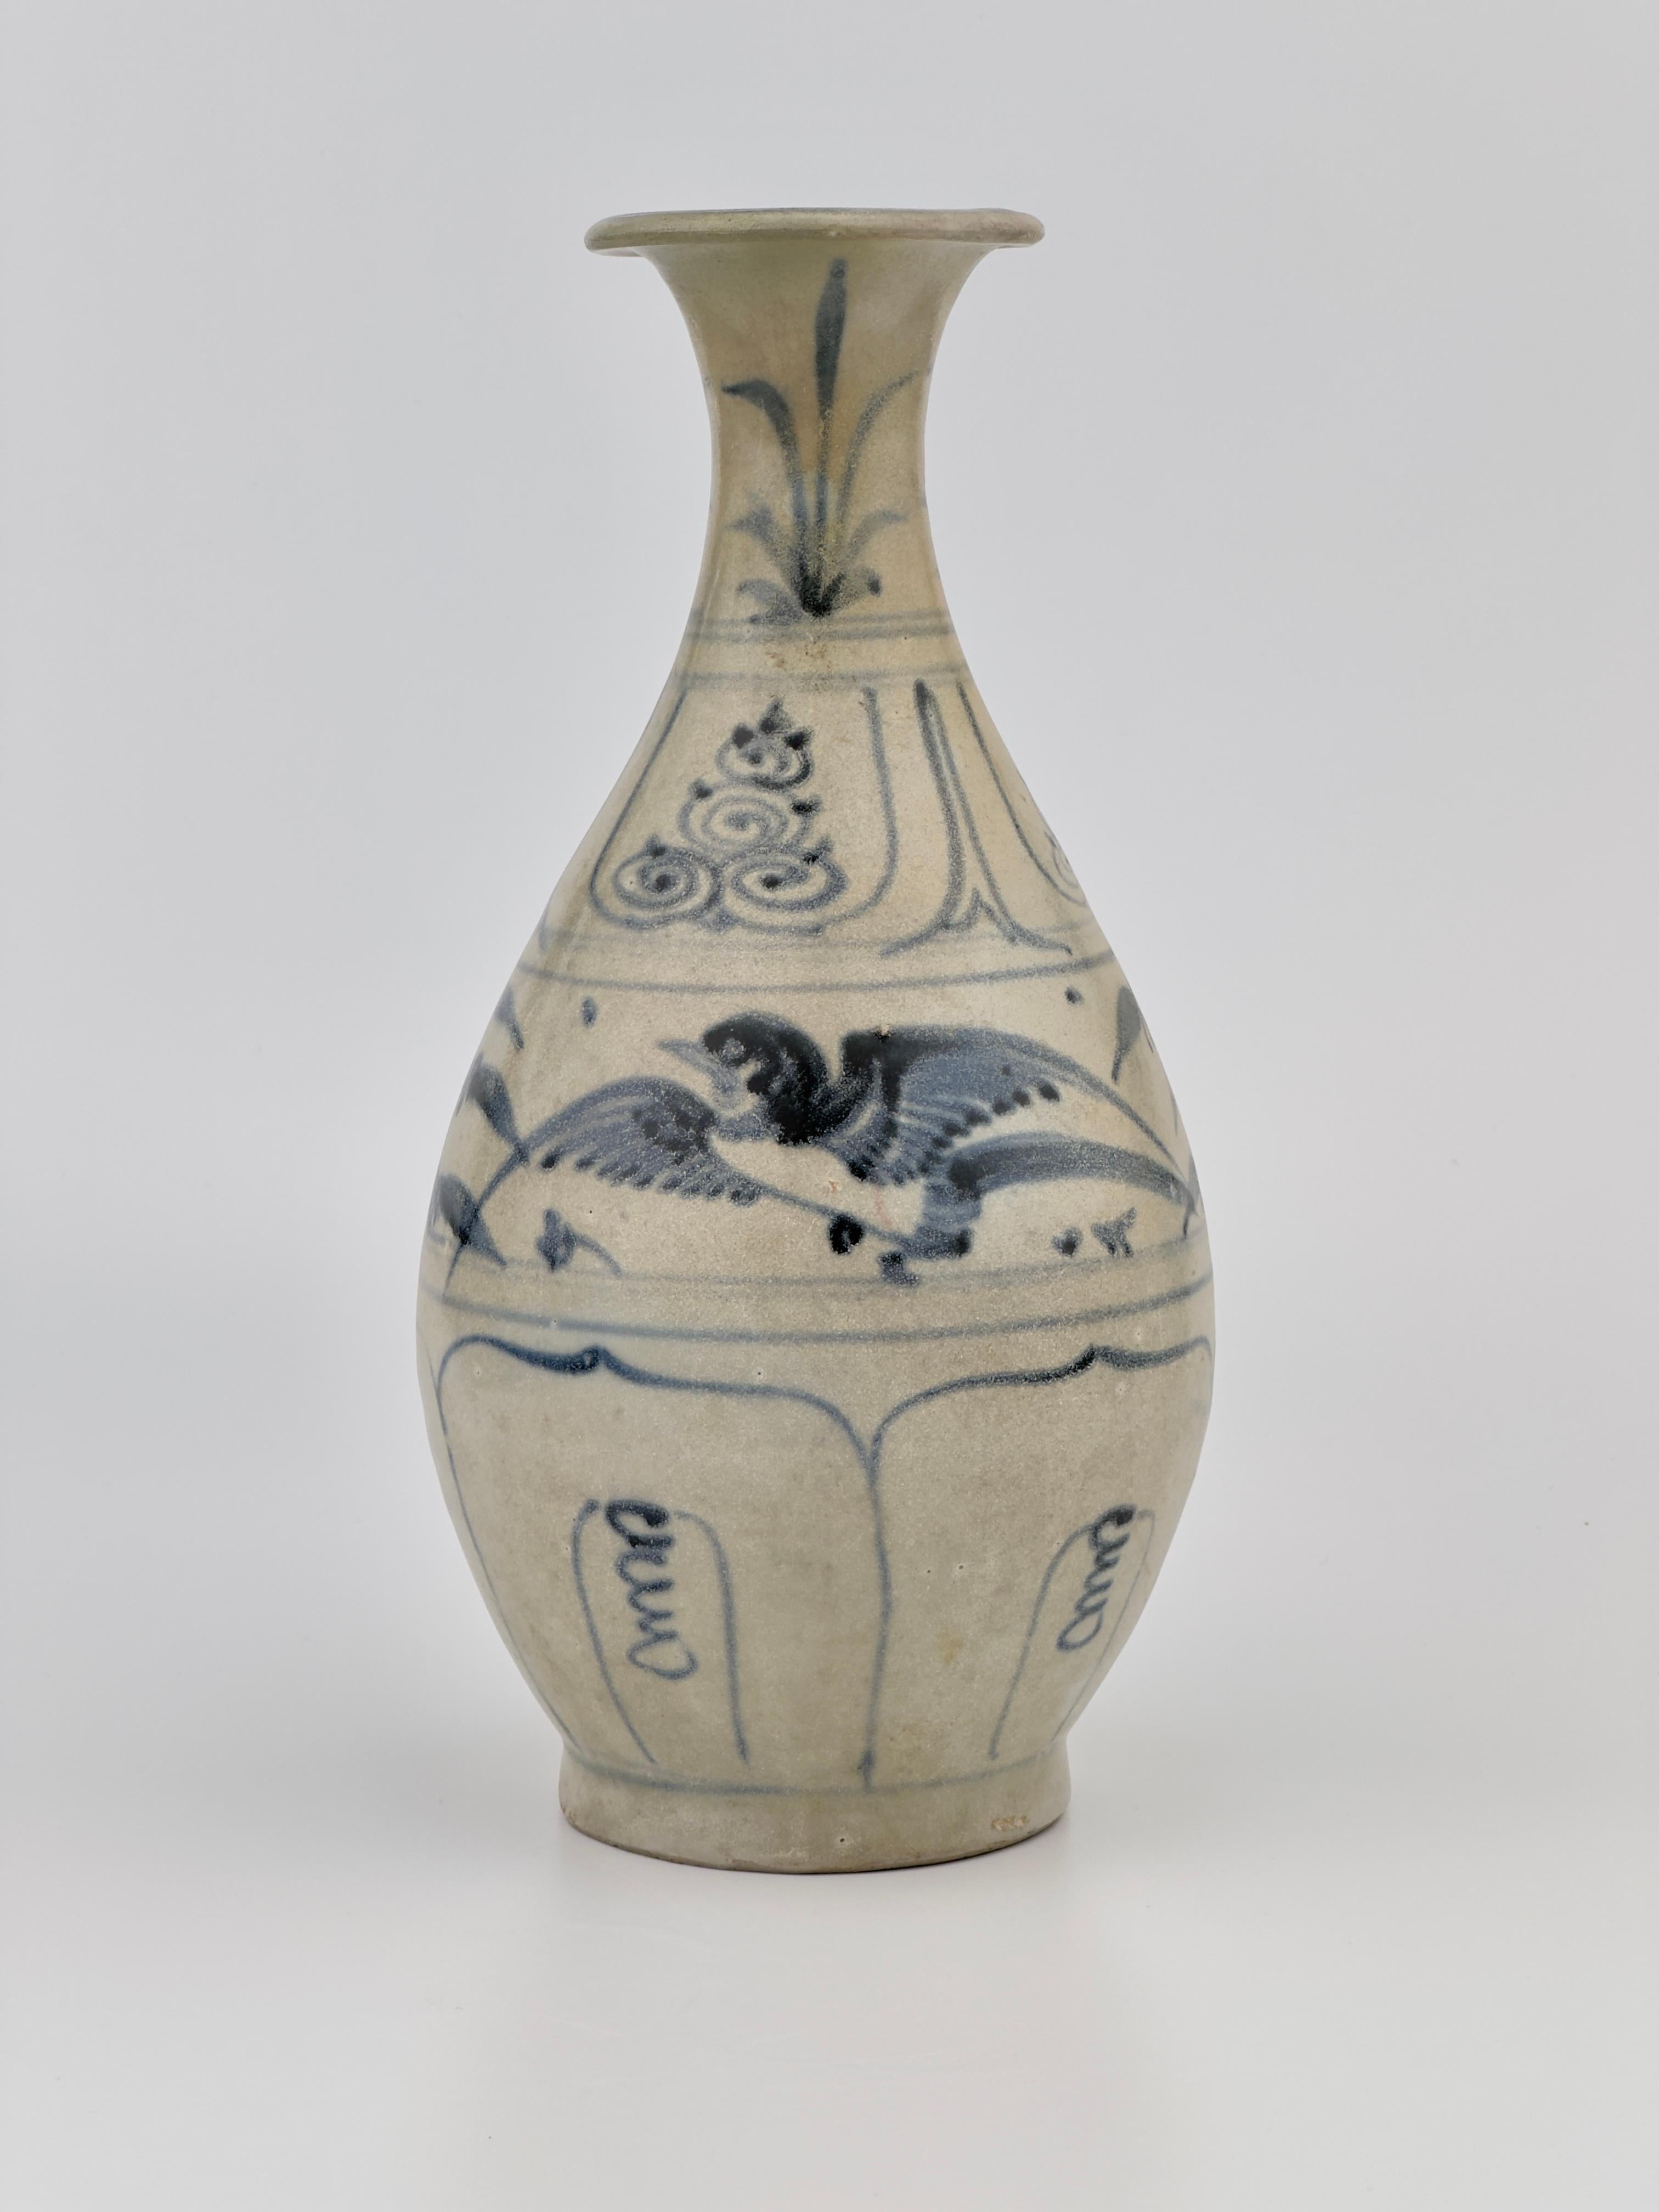 Lively birds flit across the body of this pear-shaped vase. The cobalt blue of the underpainting remains dark, even though the clear glaze of the surface has worn away after centuries under the sea. There was remarkable variation in the condition of